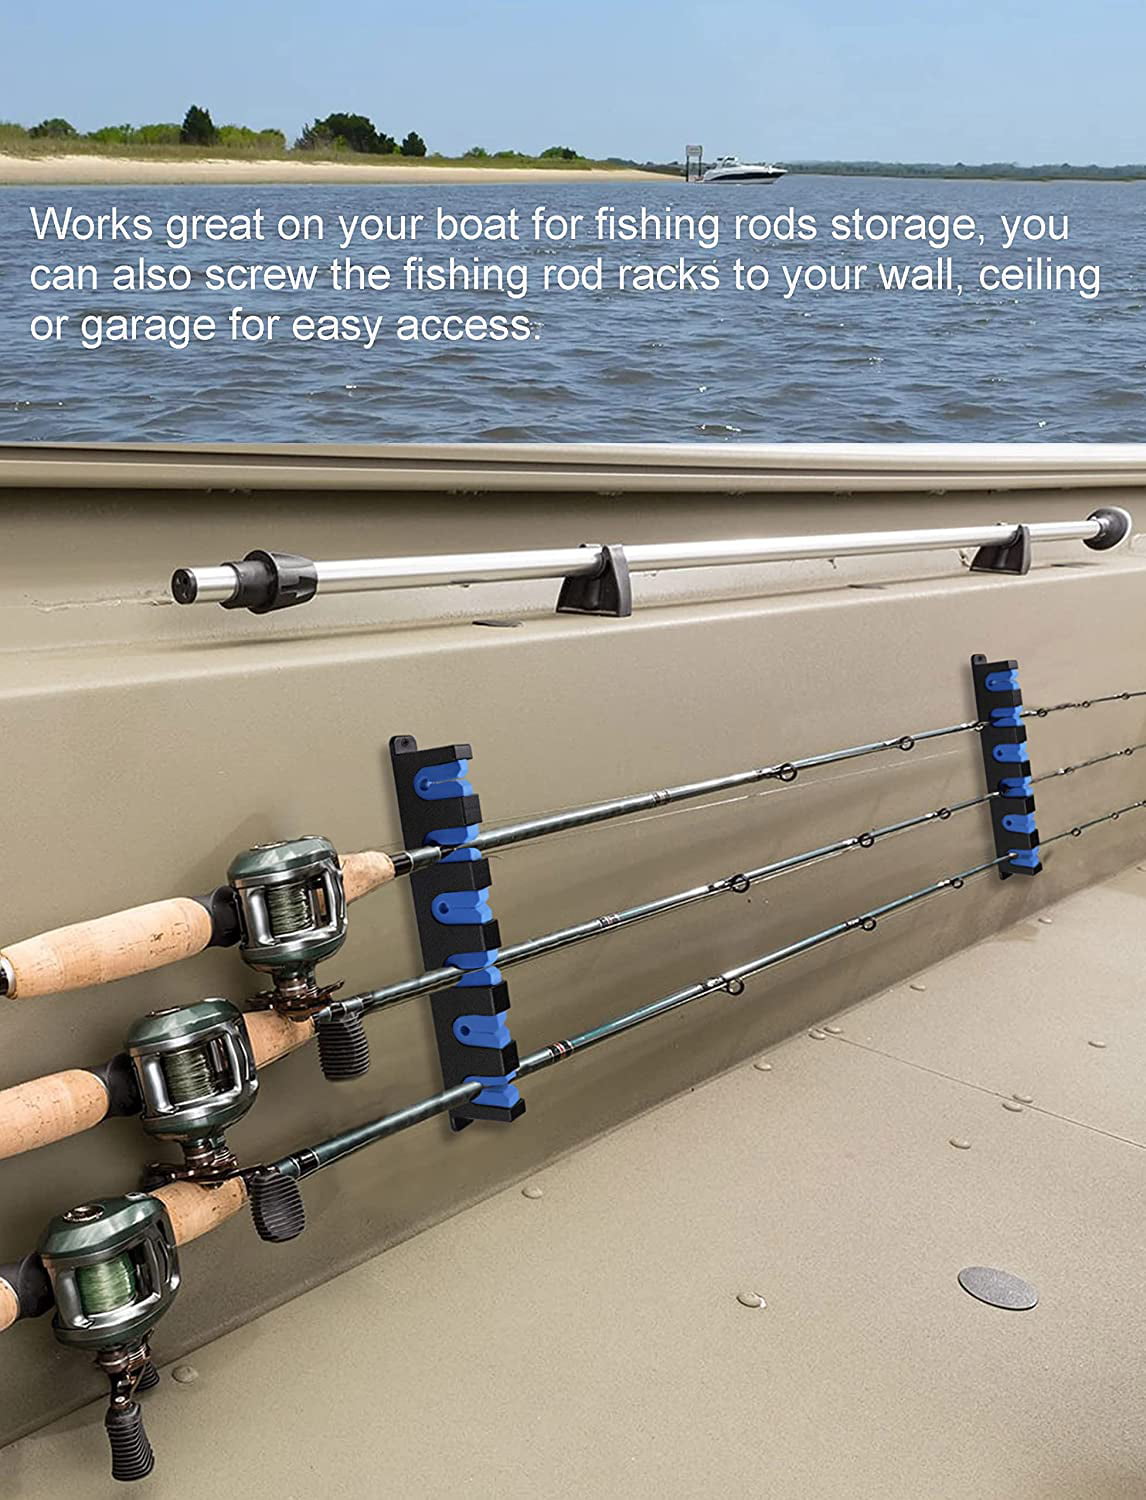 Fishing pole holder with side pole support for fishing piers or bridges.  Very effective. : r/Fishing